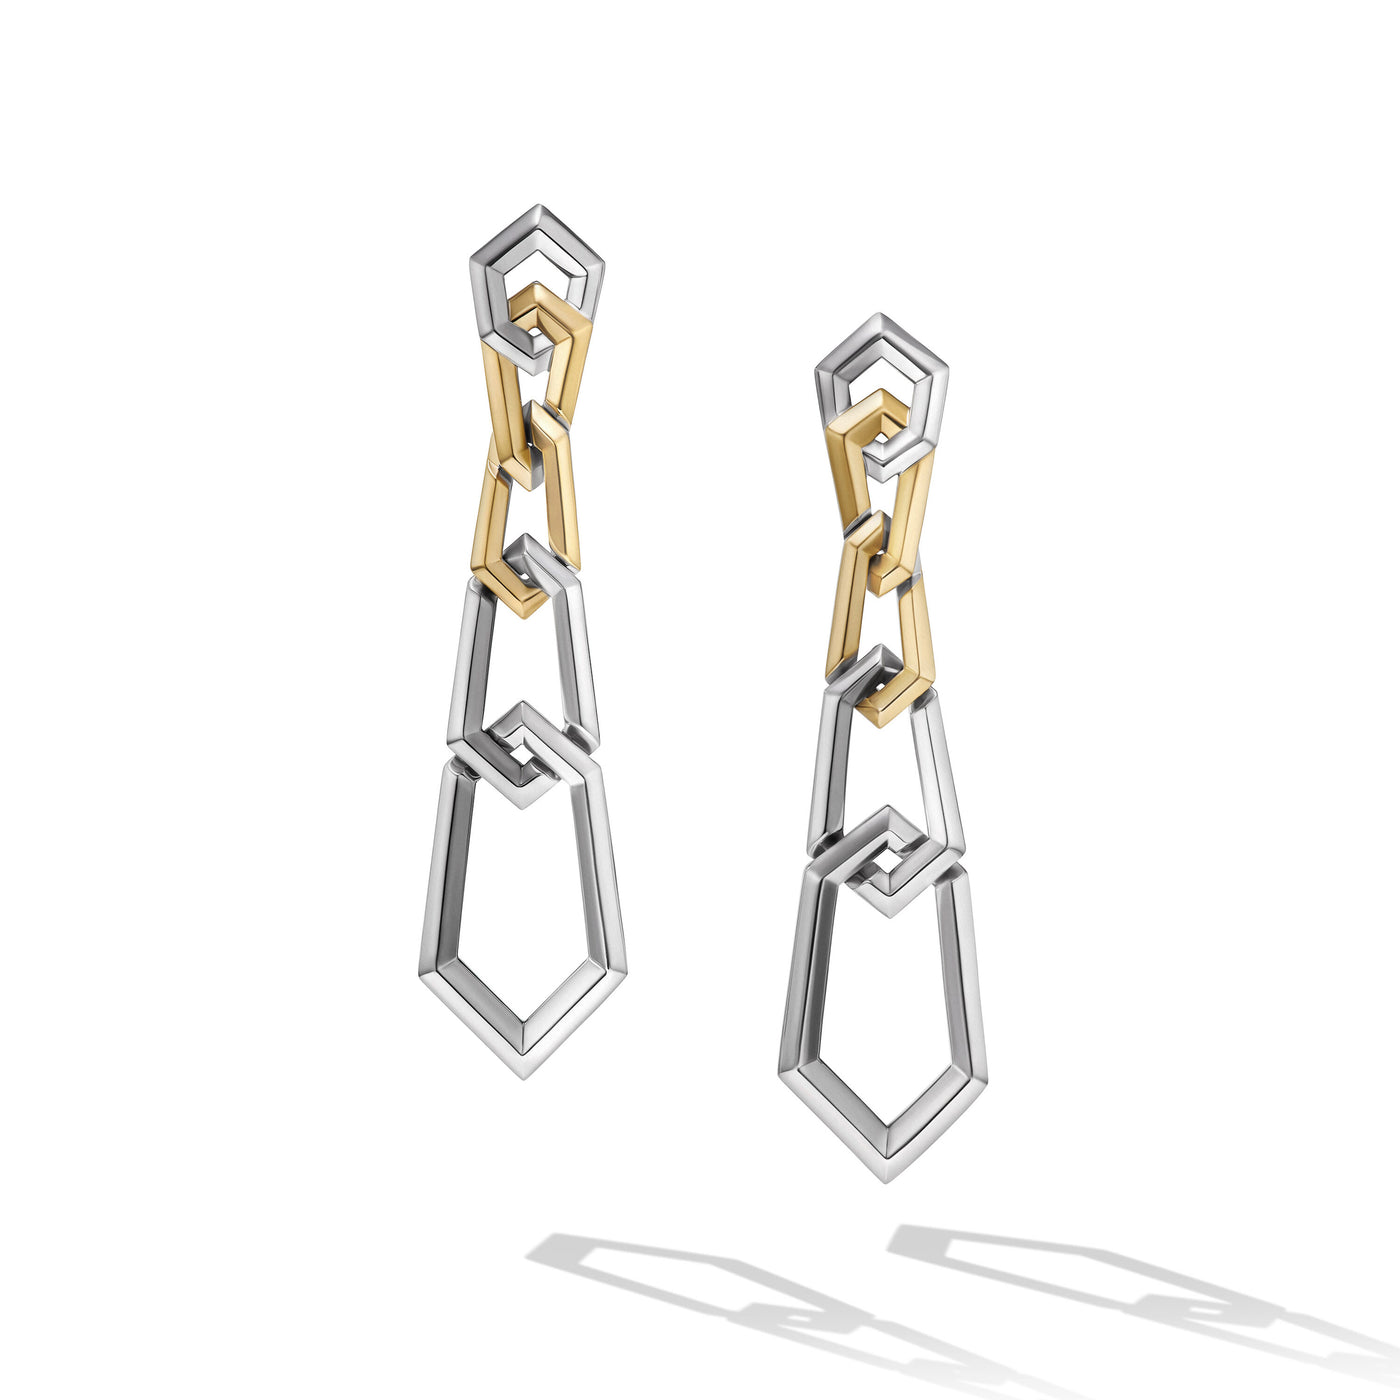 Carlyle™ Linked Drop Earrings in Sterling Silver with 18K Yellow Gold\, 74mm